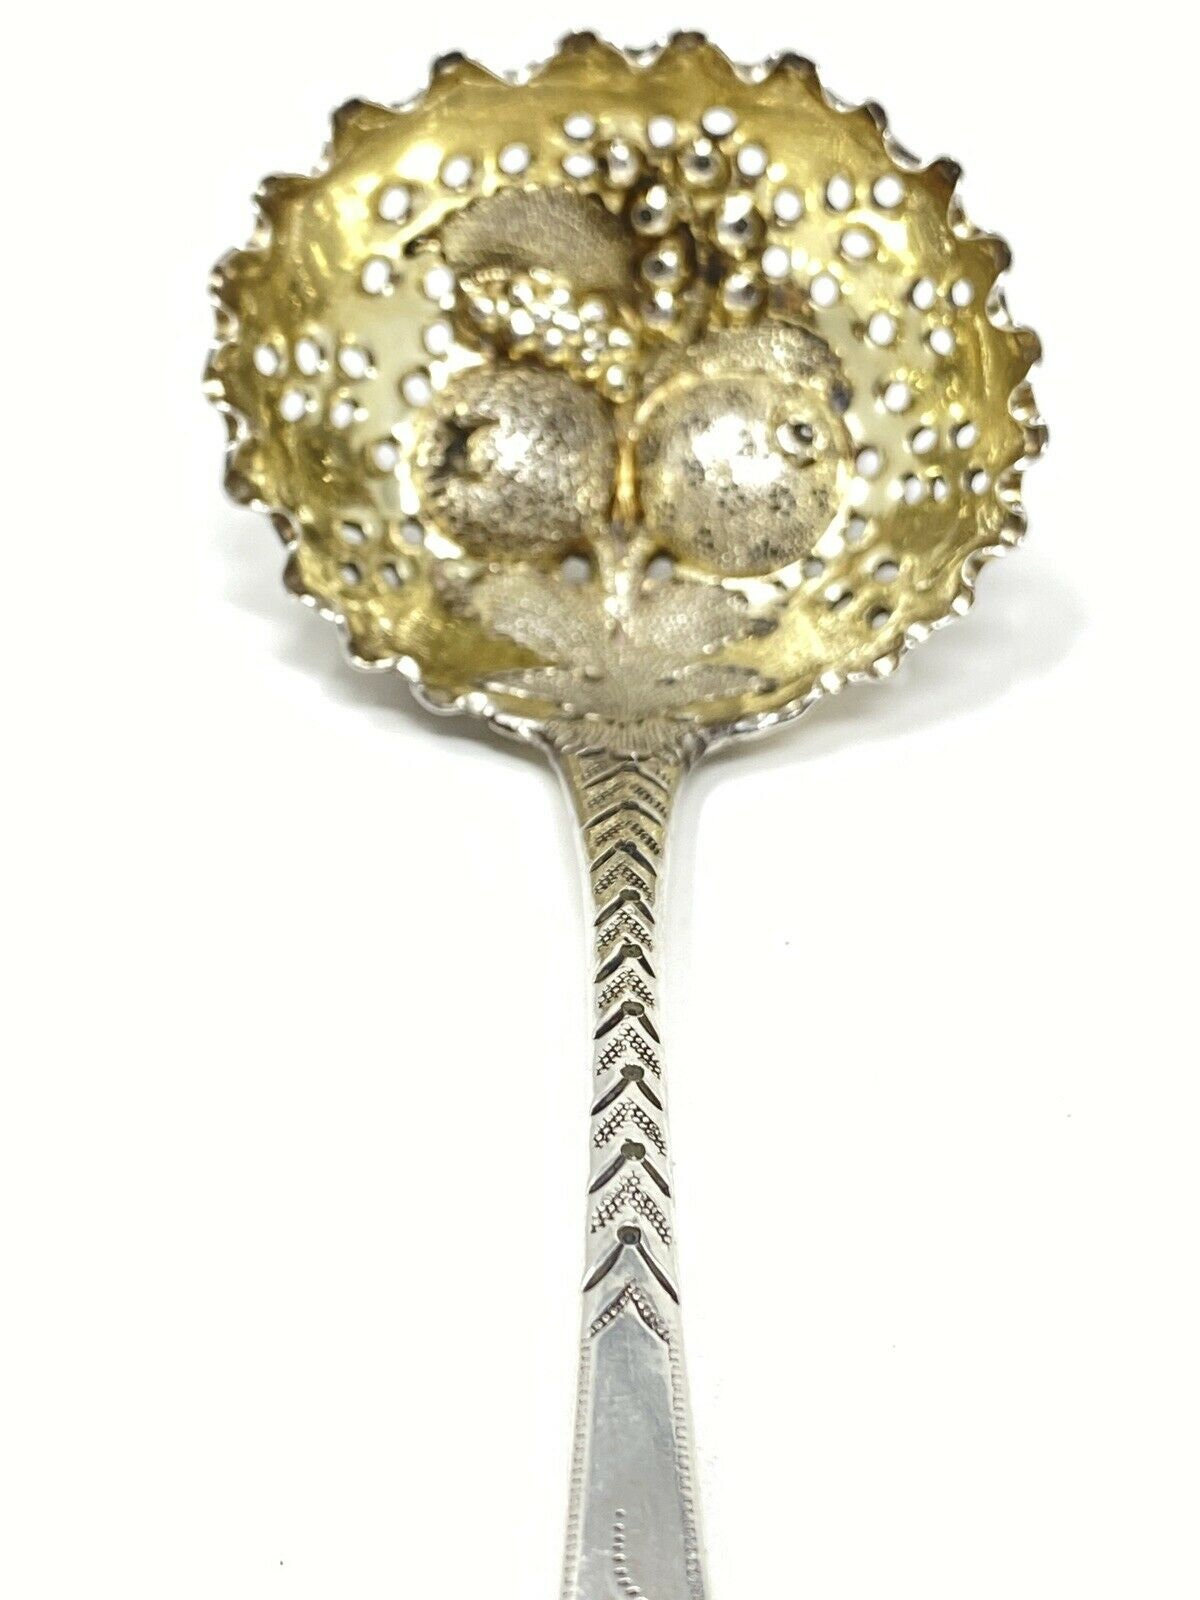 & Chawner UK Sterling Crane Family Crest Berry Ladle 1809 William Eley Fearn 